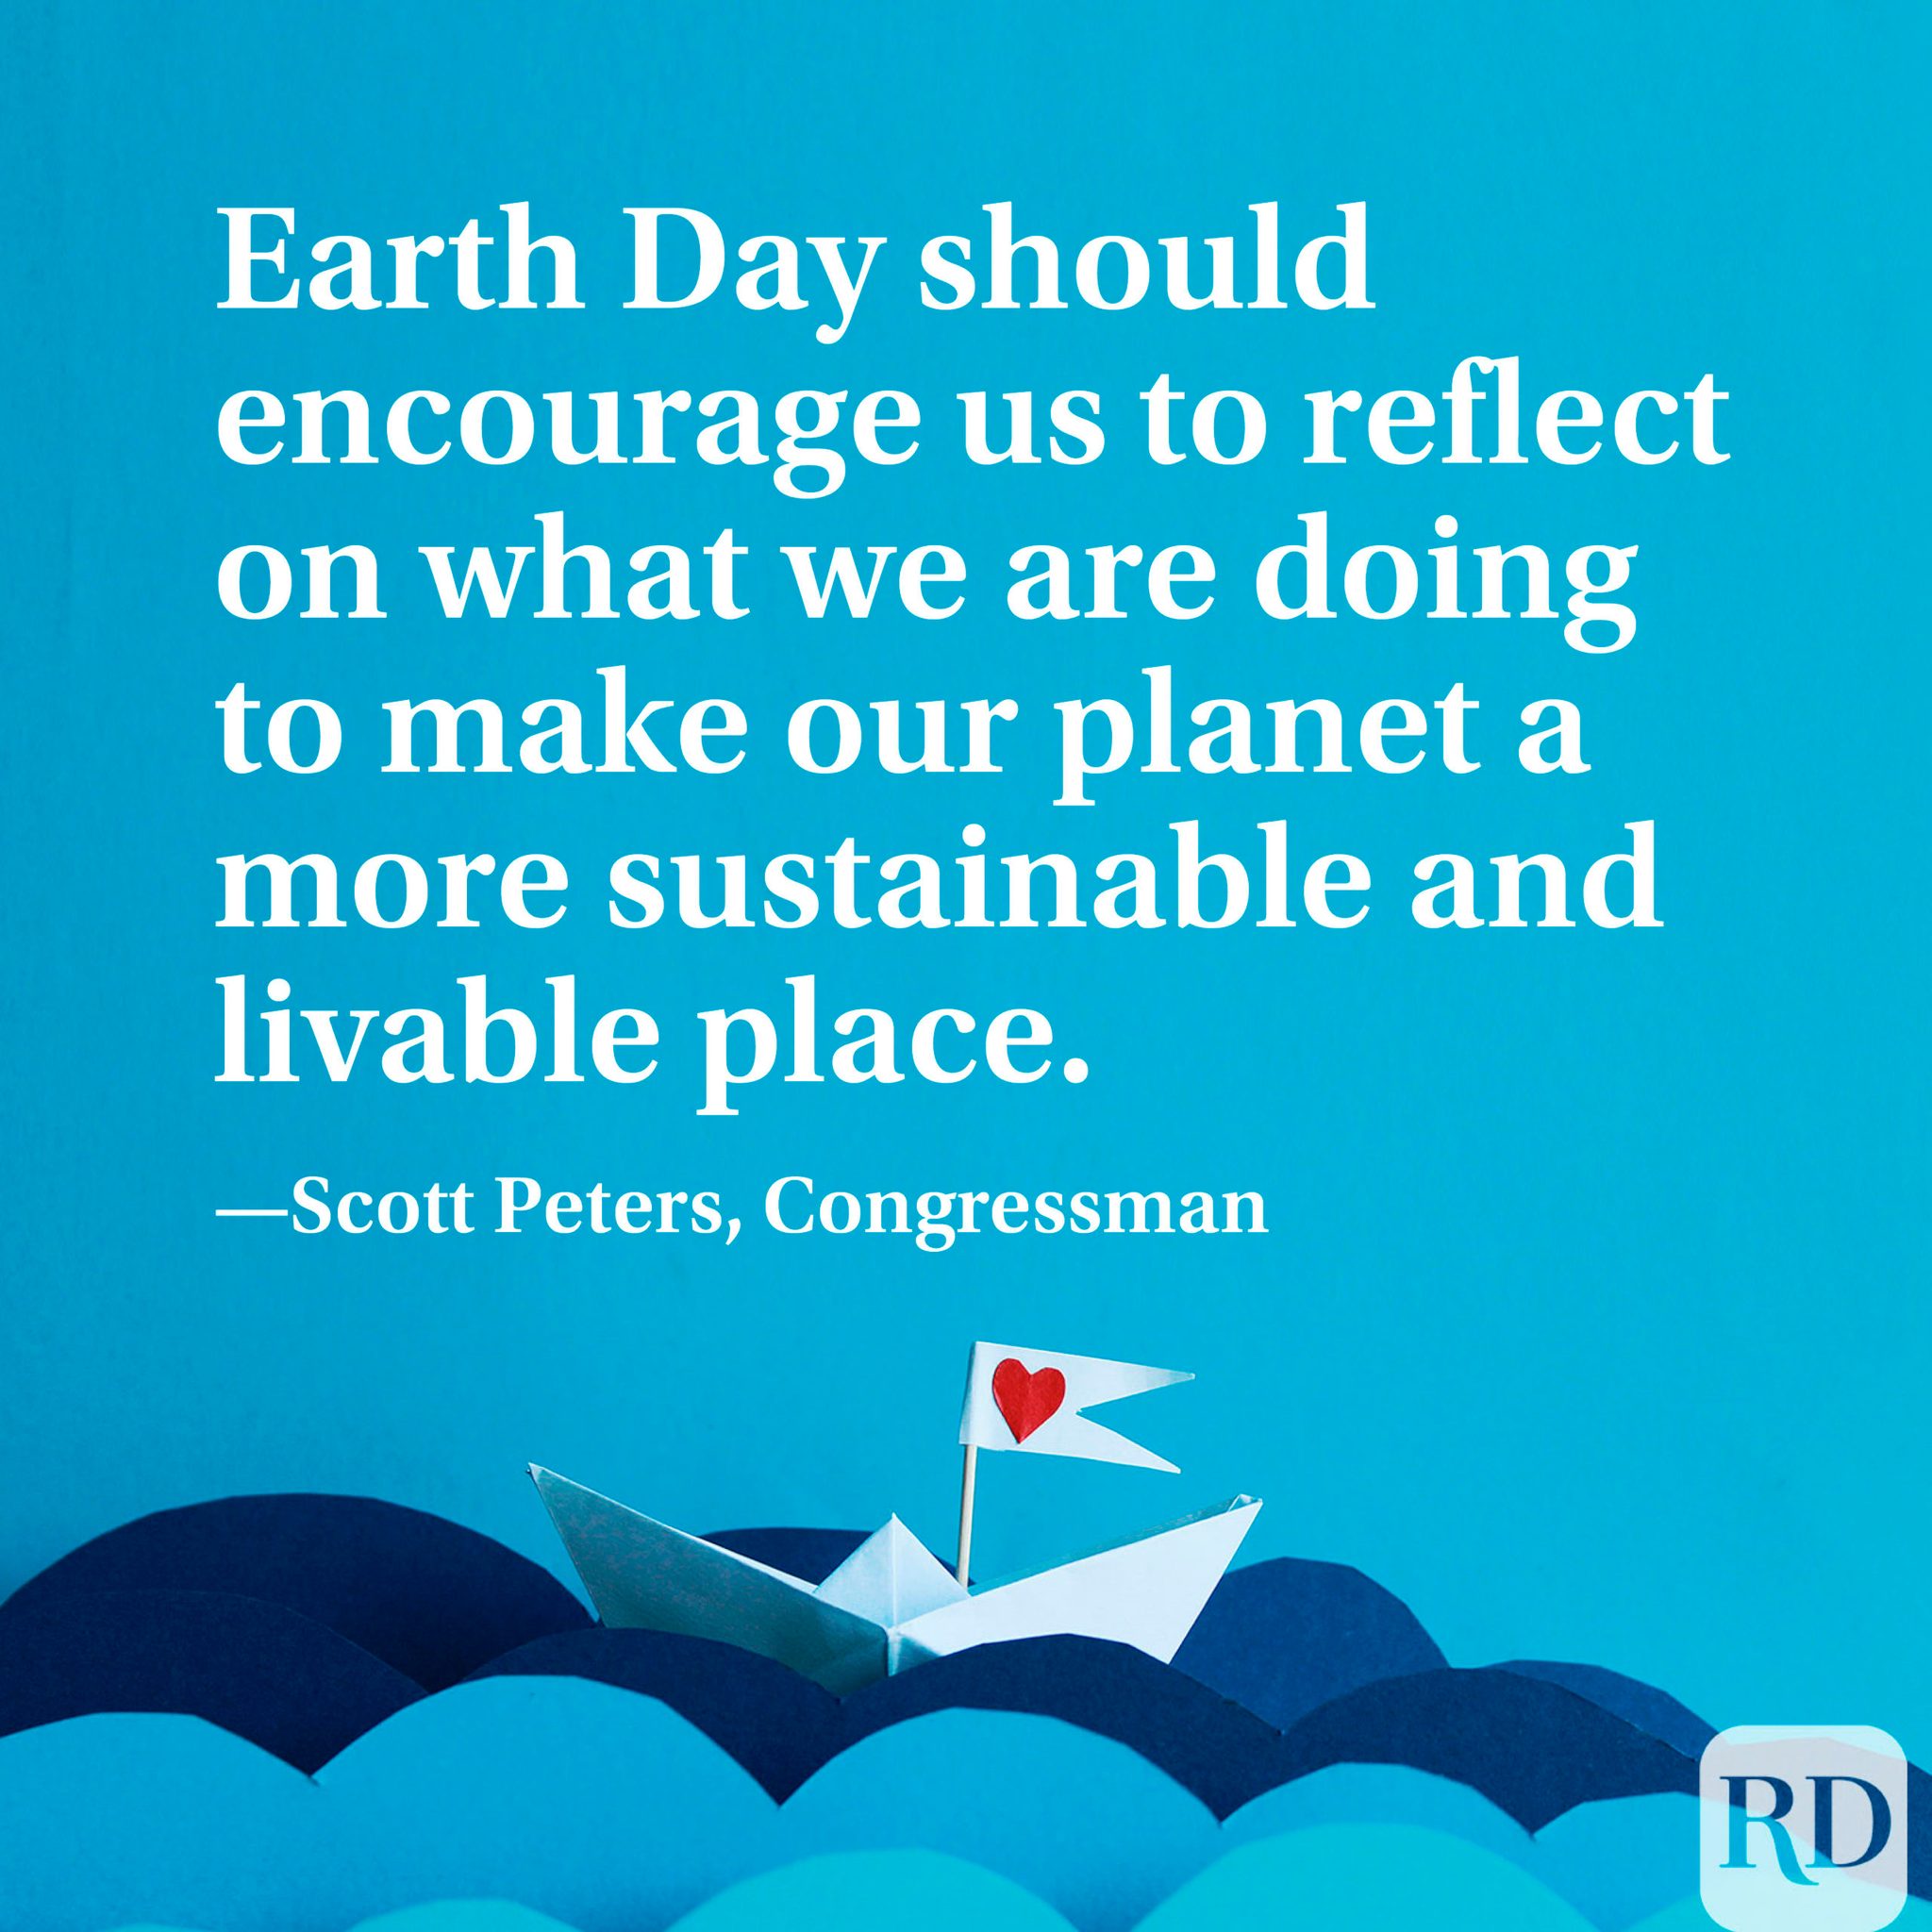 31 Earth Day Quotes to Share Reader's Digest